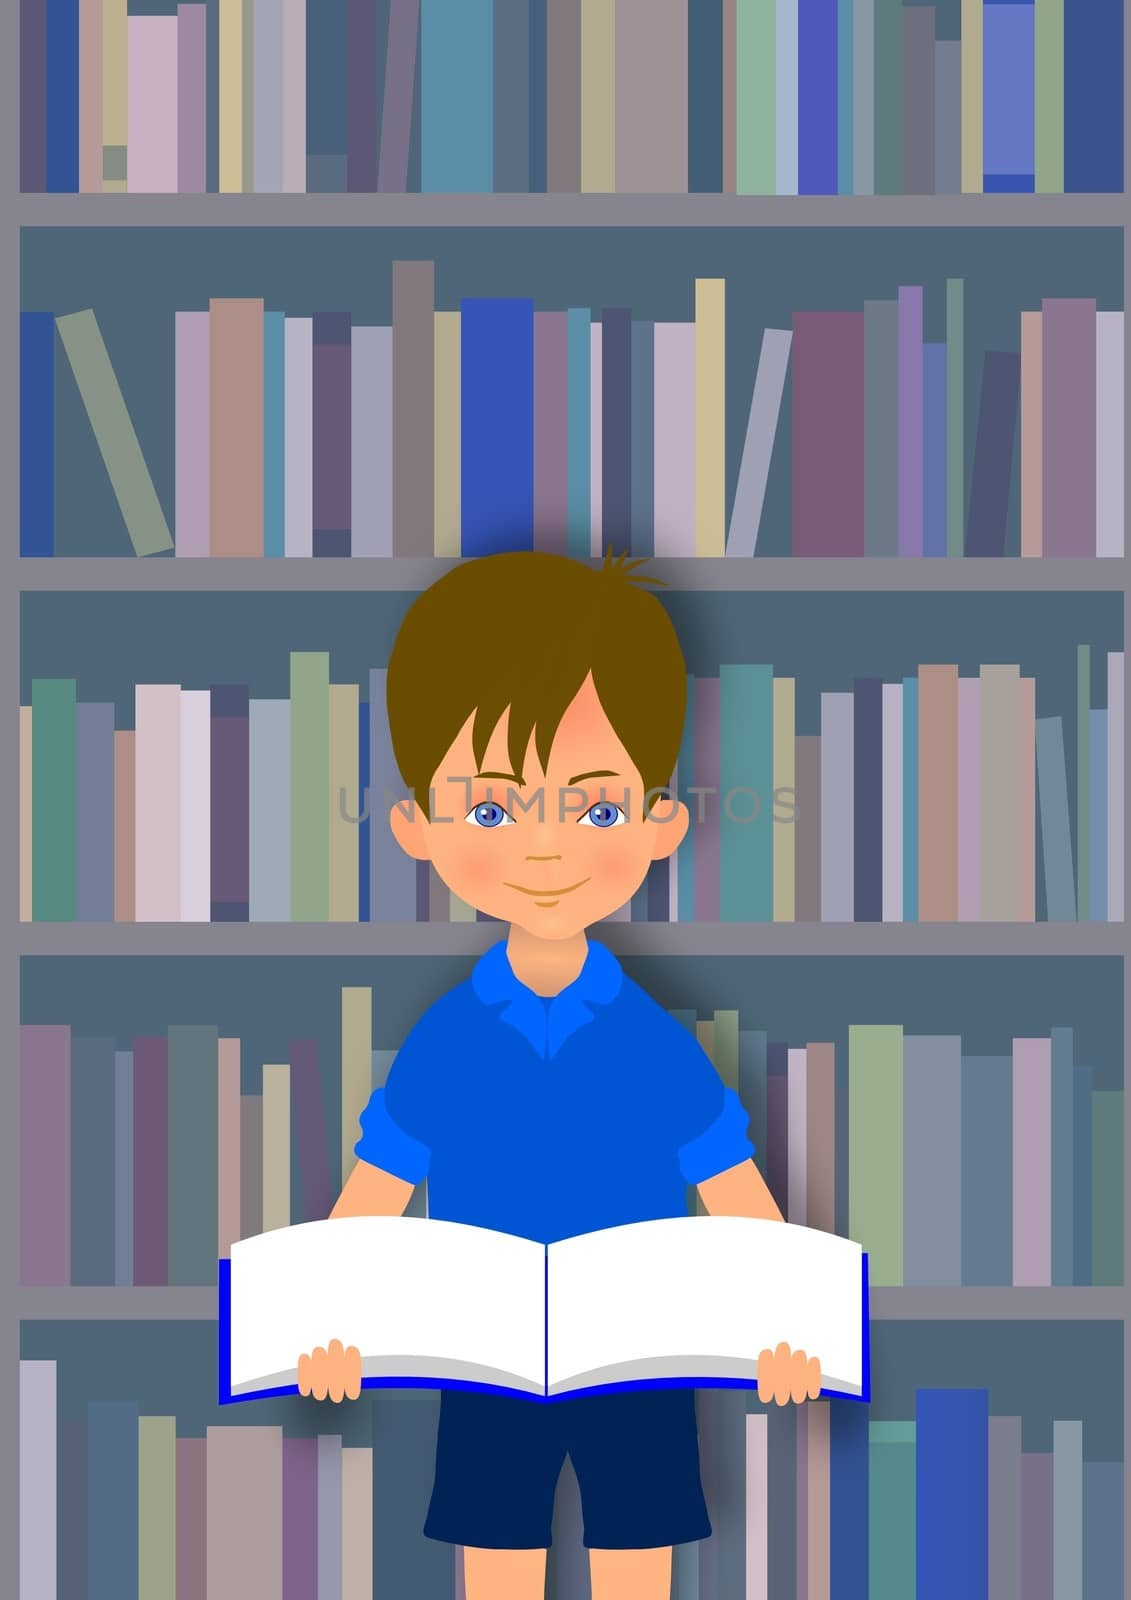 Illustration of a boy holding a book in front of bookshelves